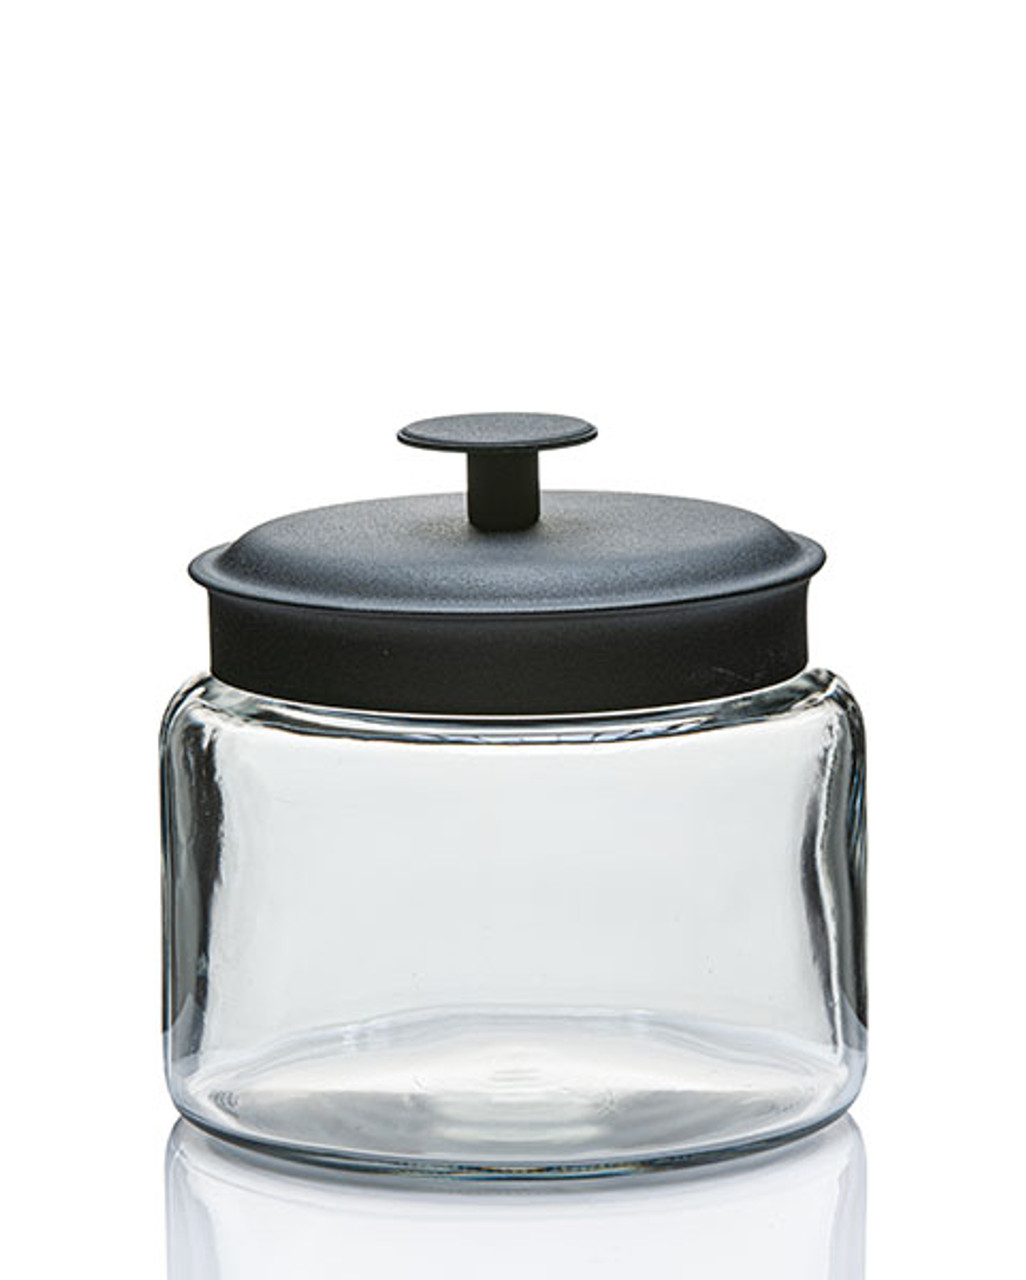 Anchor Hocking Glass Jars with Acacia Lids, Set of 3